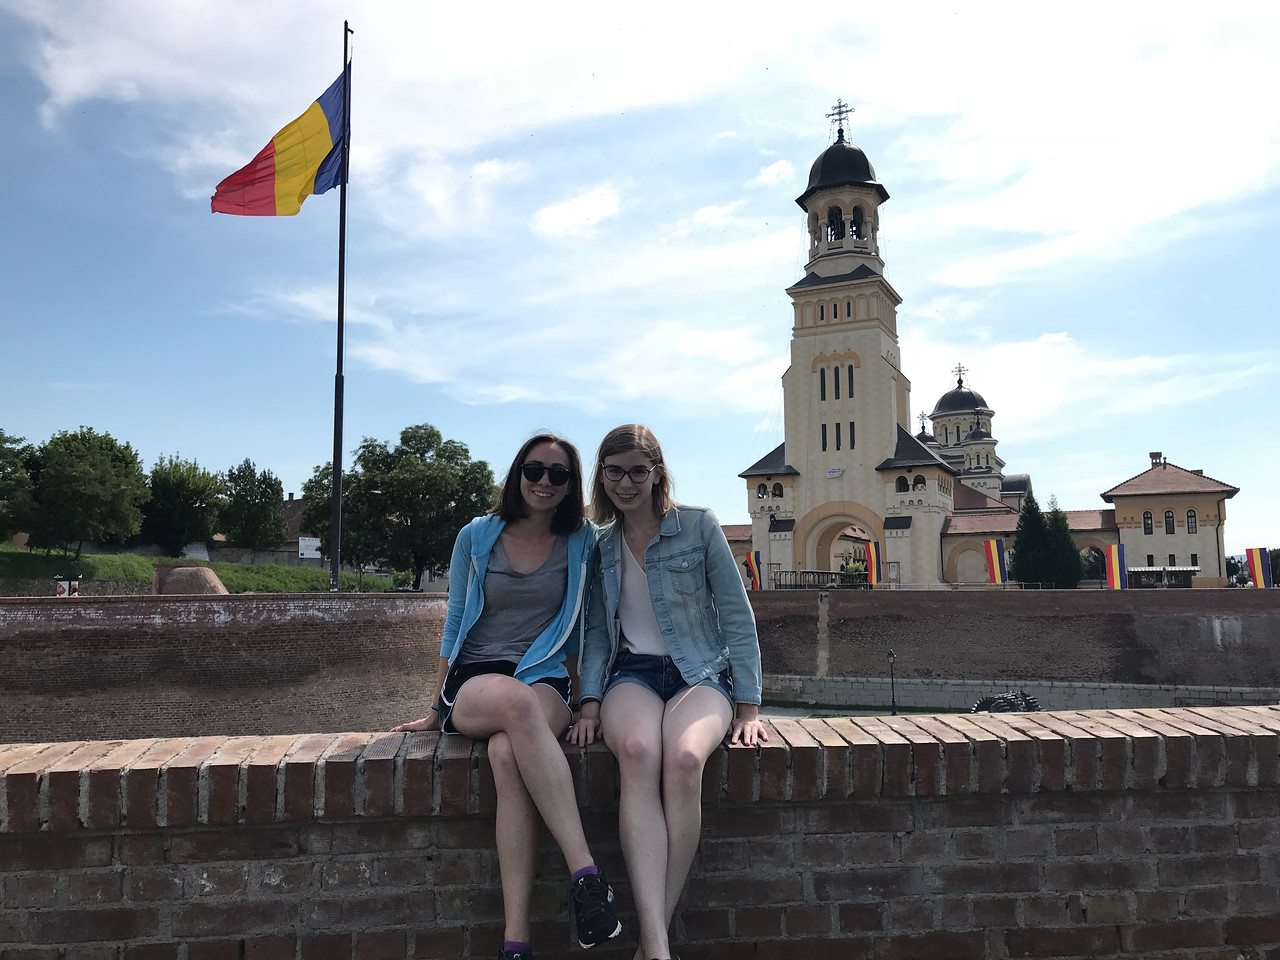 Two students sit on a wall with a Romanian building and flag in the background.